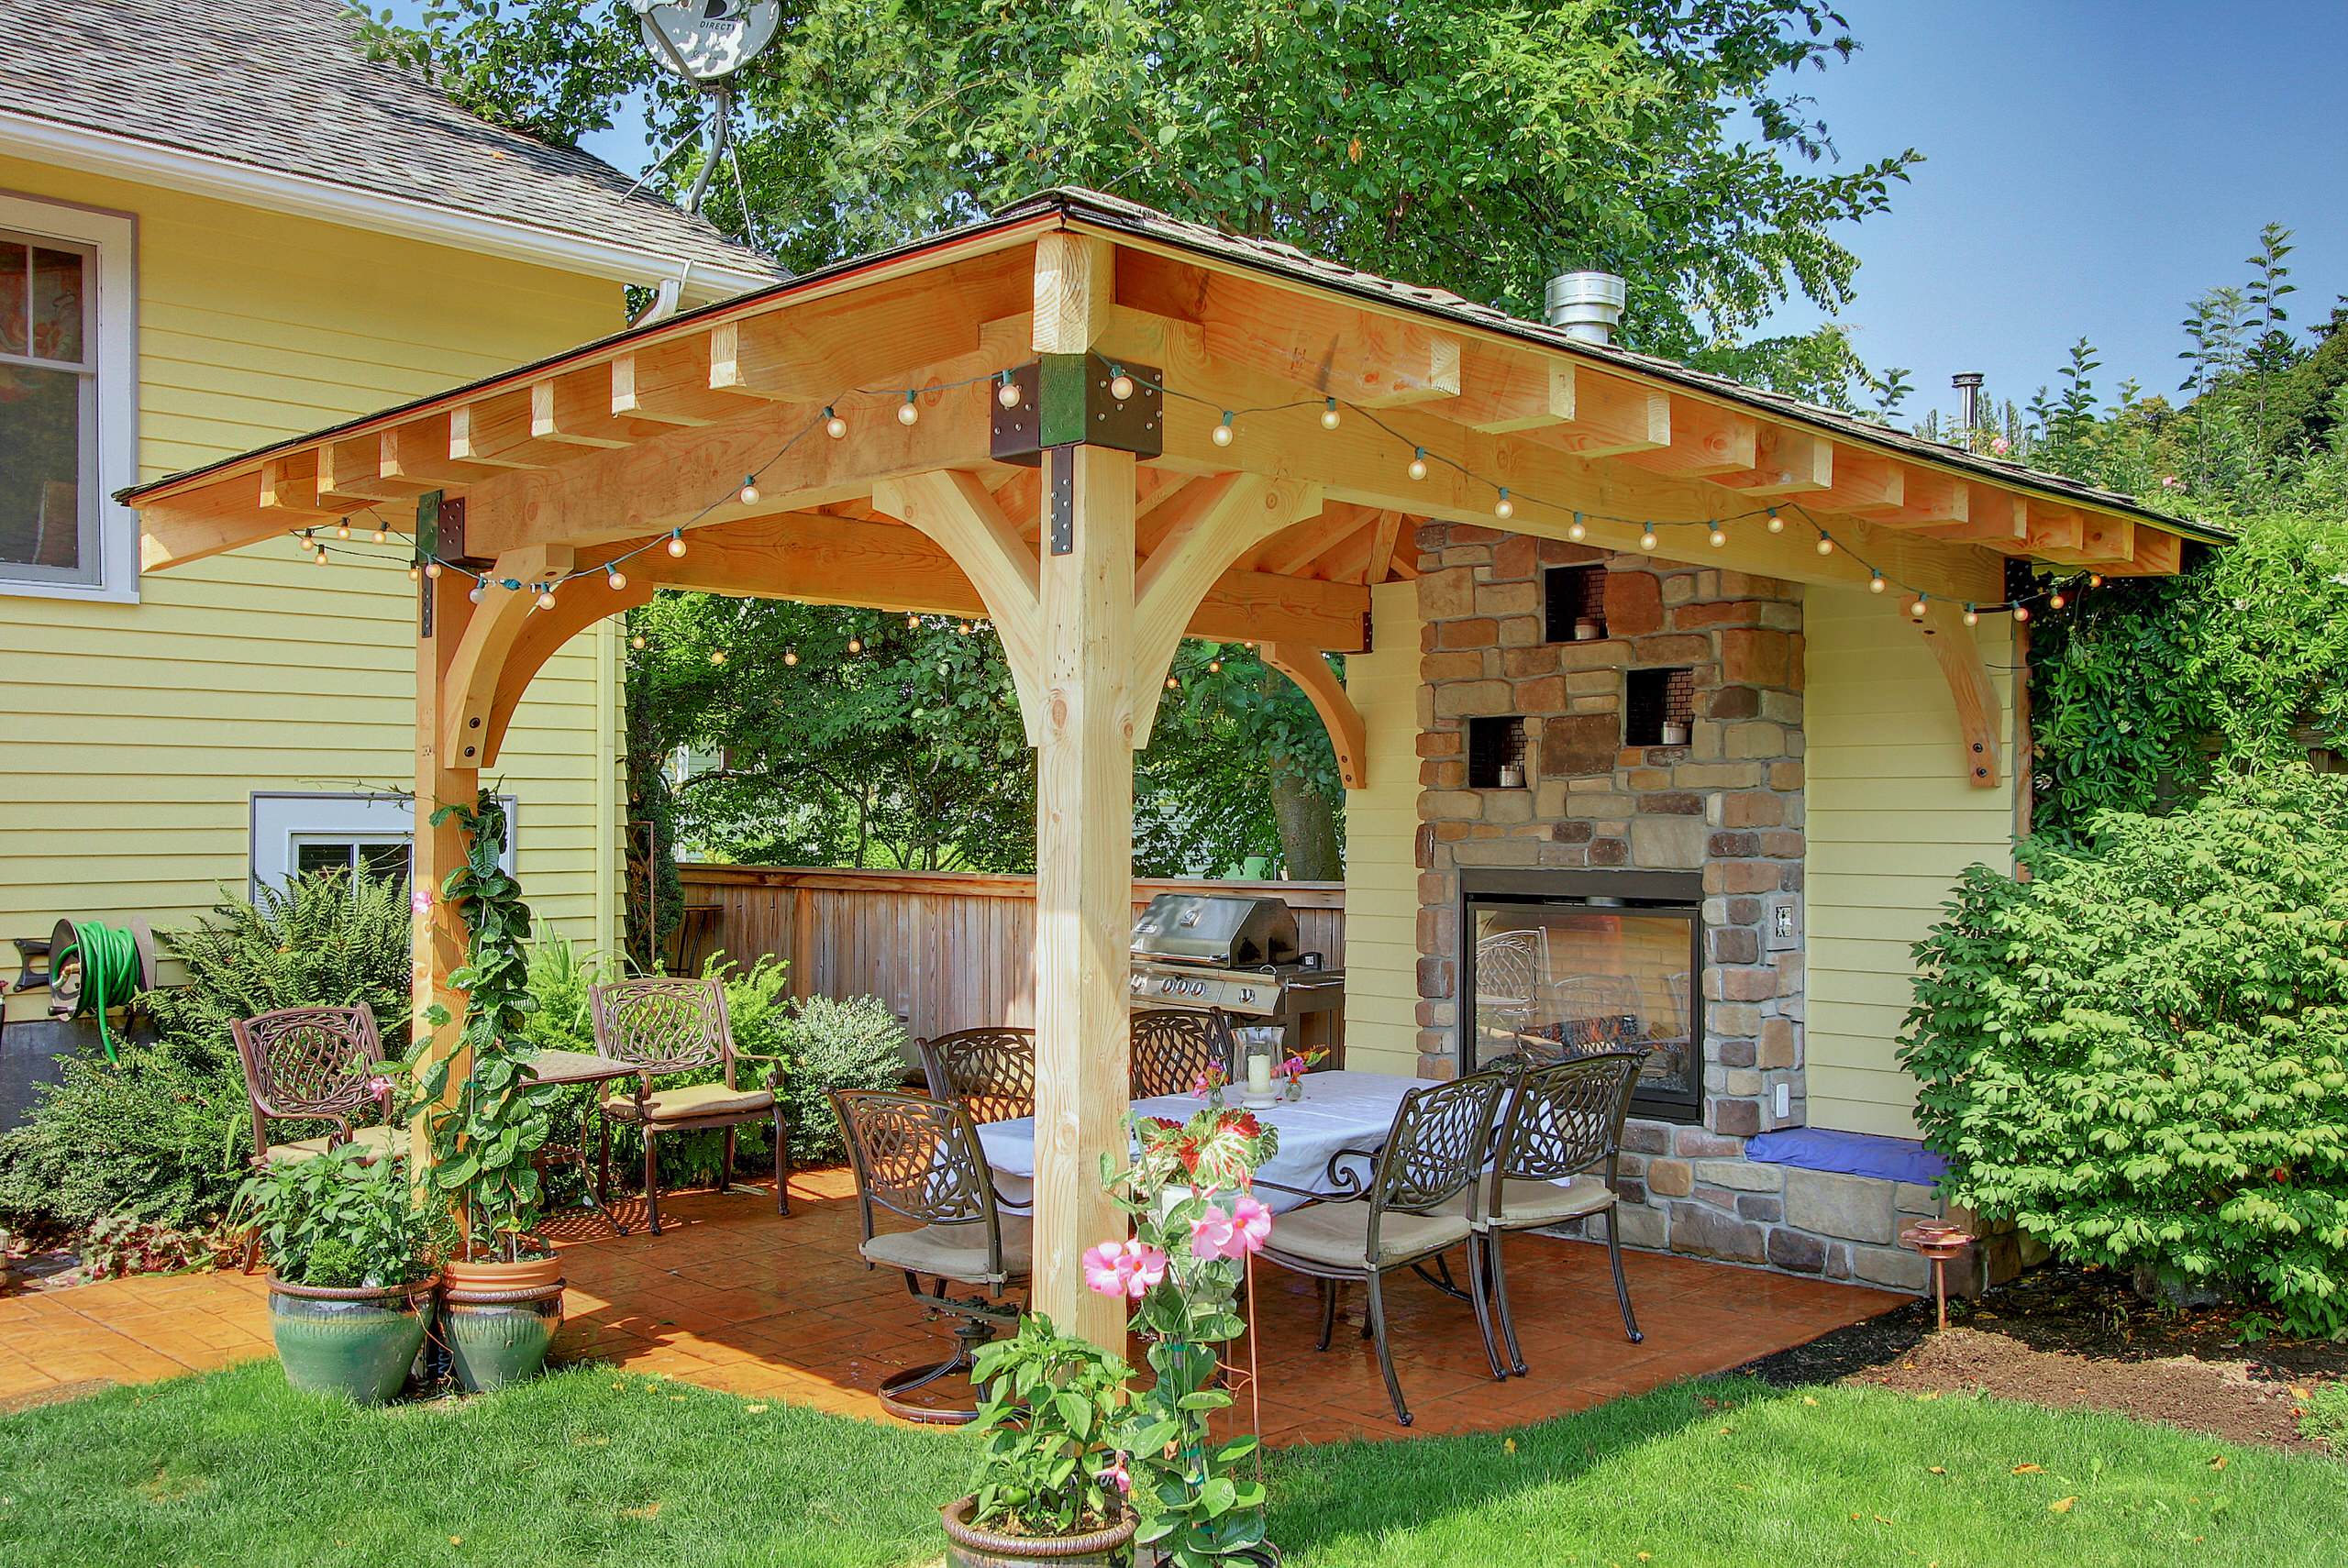 Patio With A Fire Pit And Gazebo, Wooden Gazebo With Fire Pit